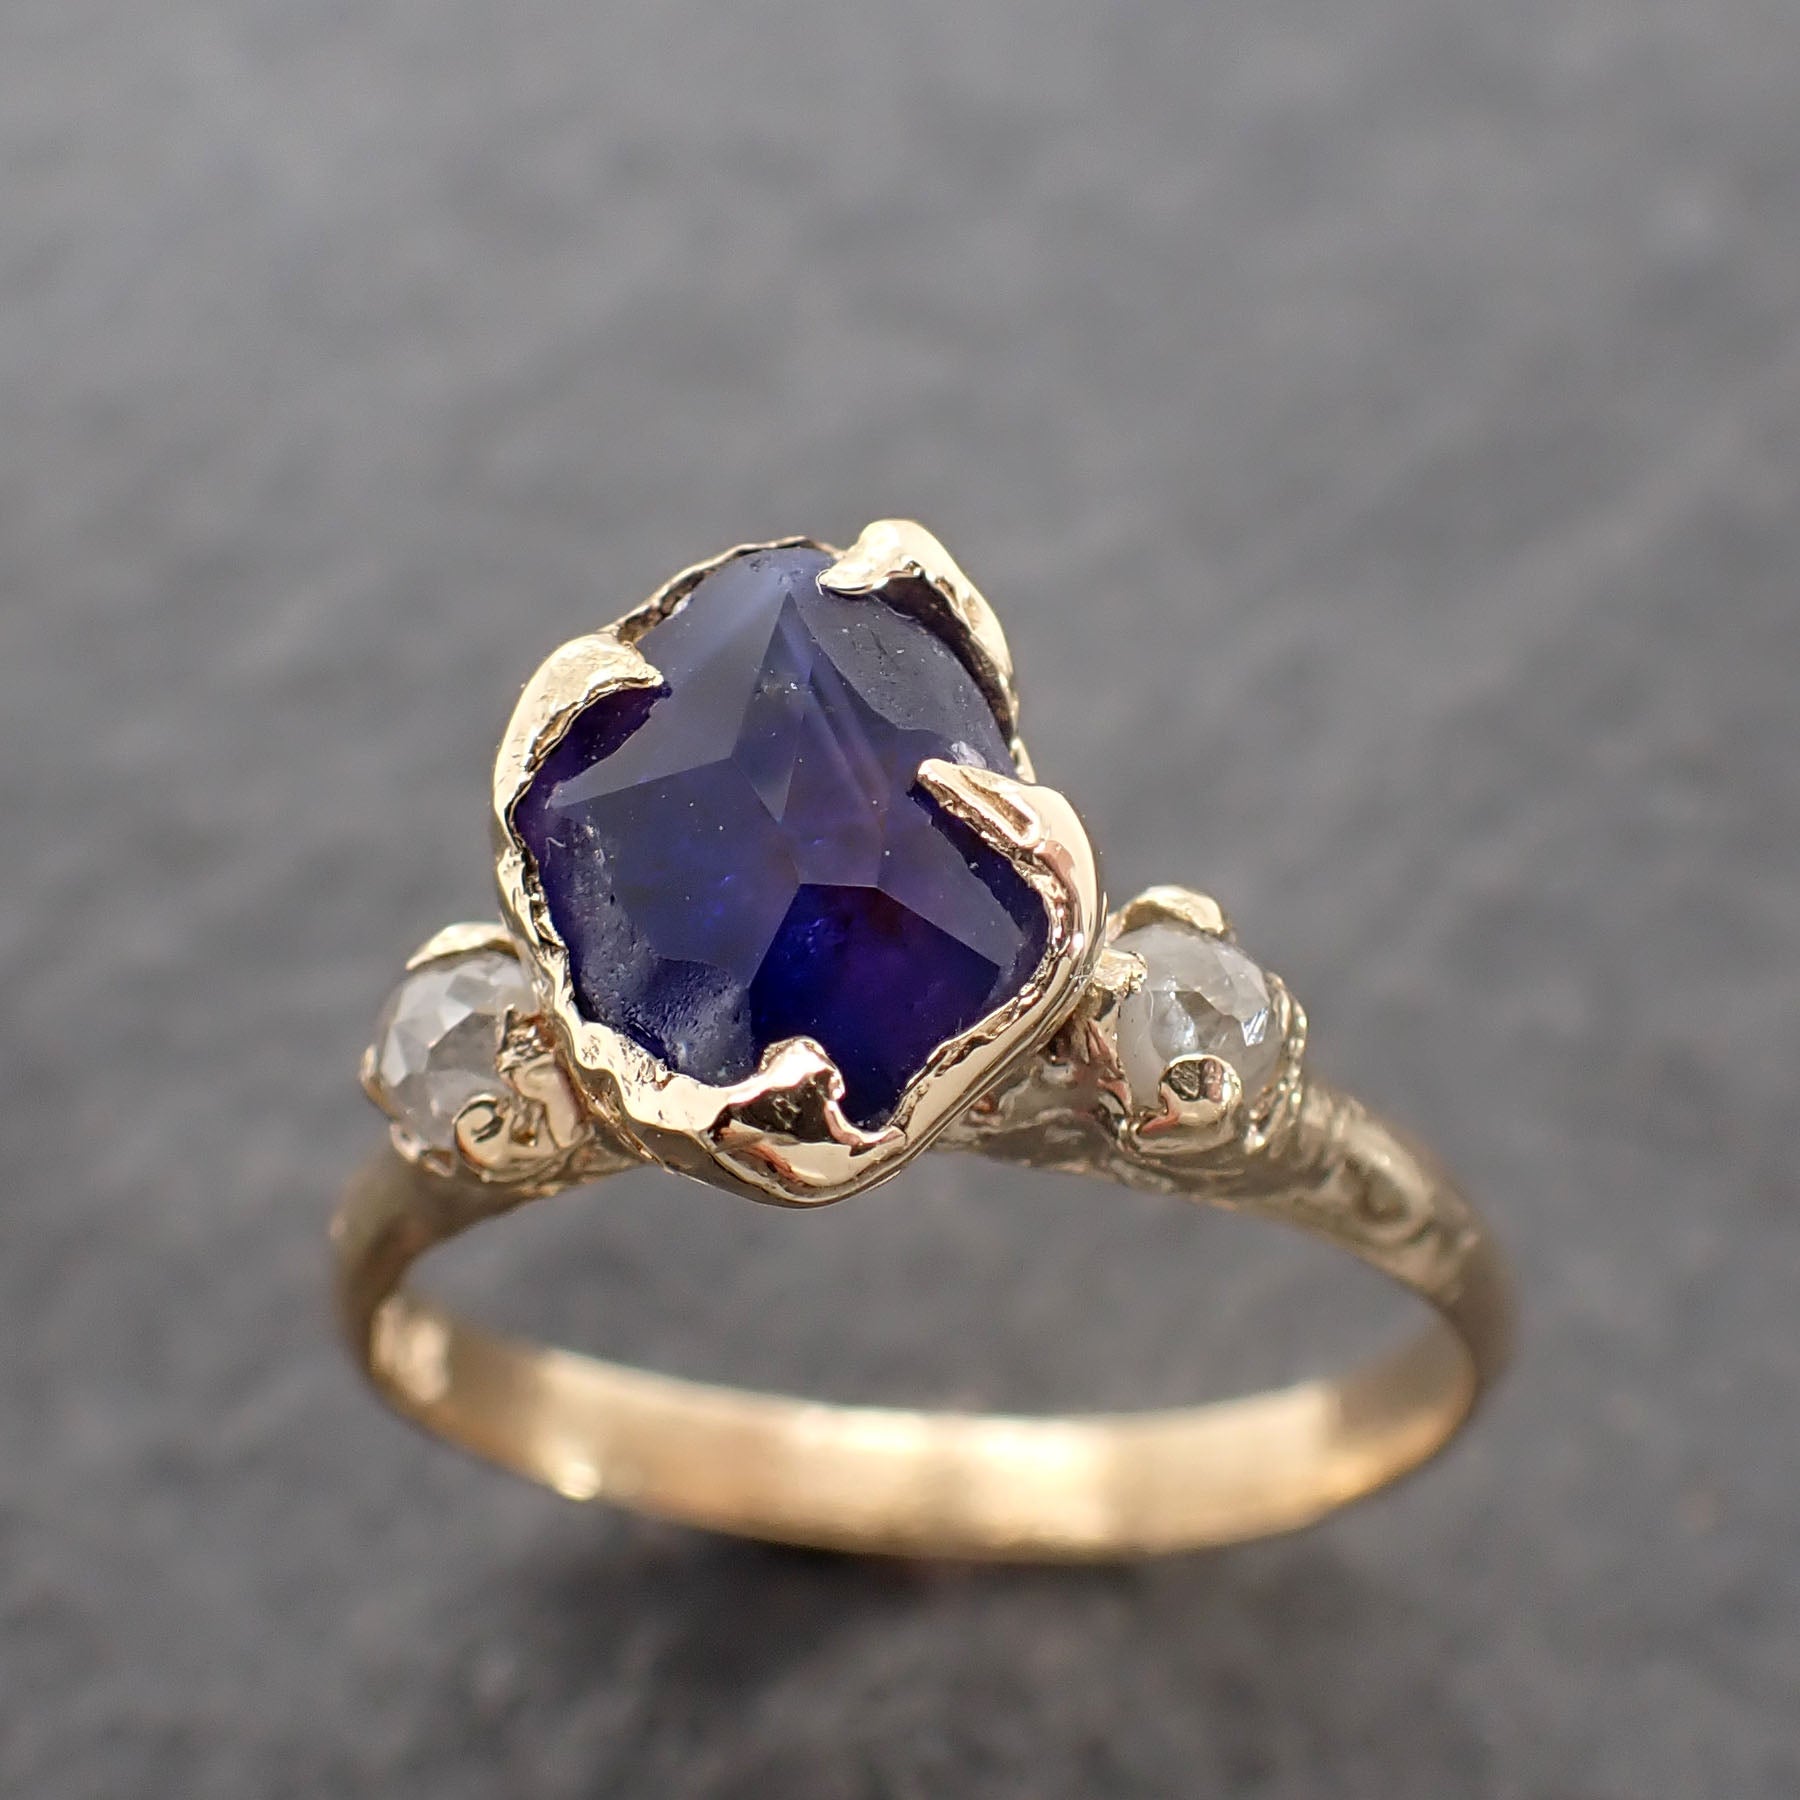 Partially Faceted blue Sapphire side diamonds Multi stone 18k Yellow Gold Engagement Ring Wedding Ring Custom Gemstone Ring 2517